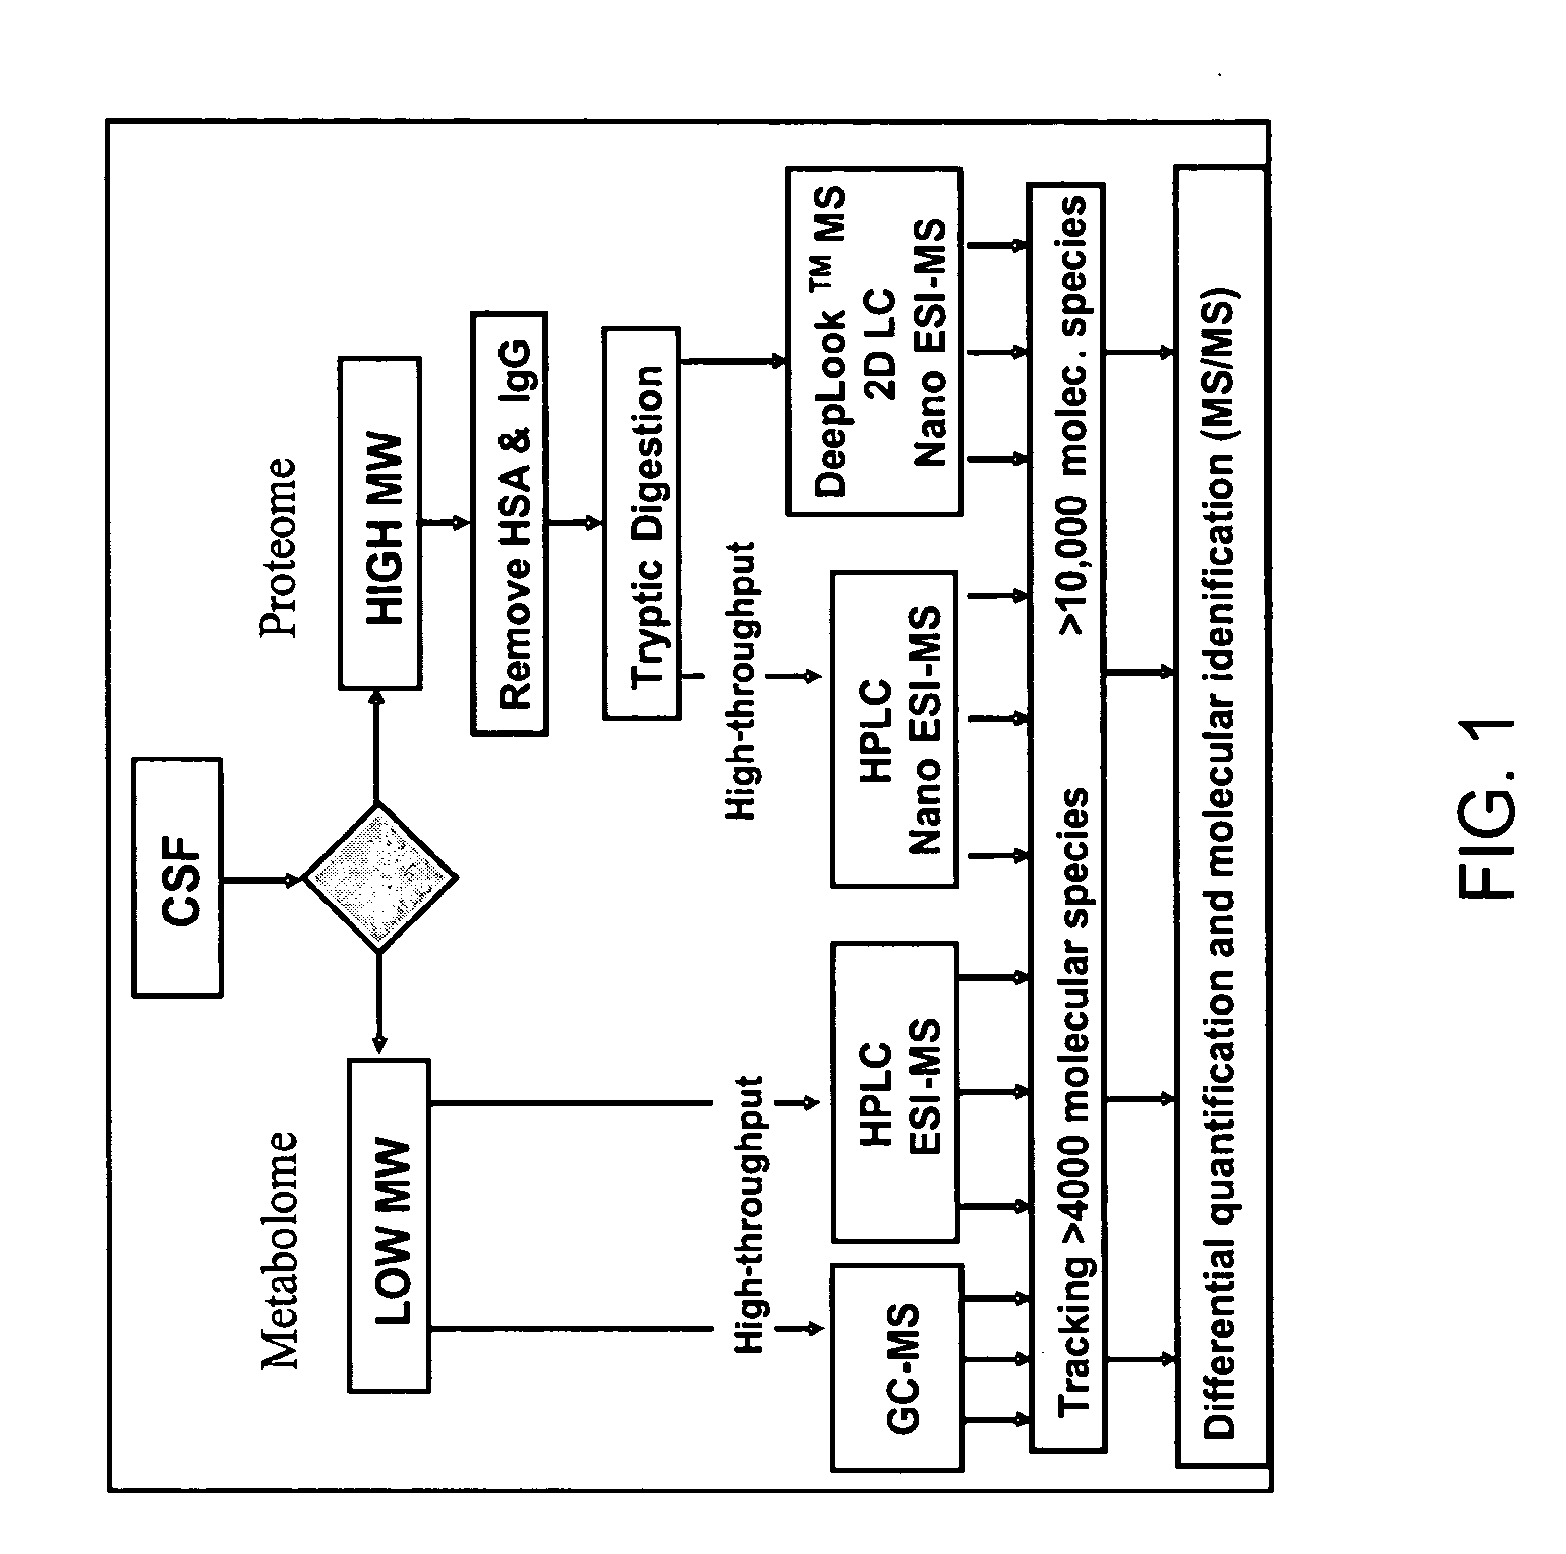 Biomarkers for multiple sclerosis and methods of use thereof